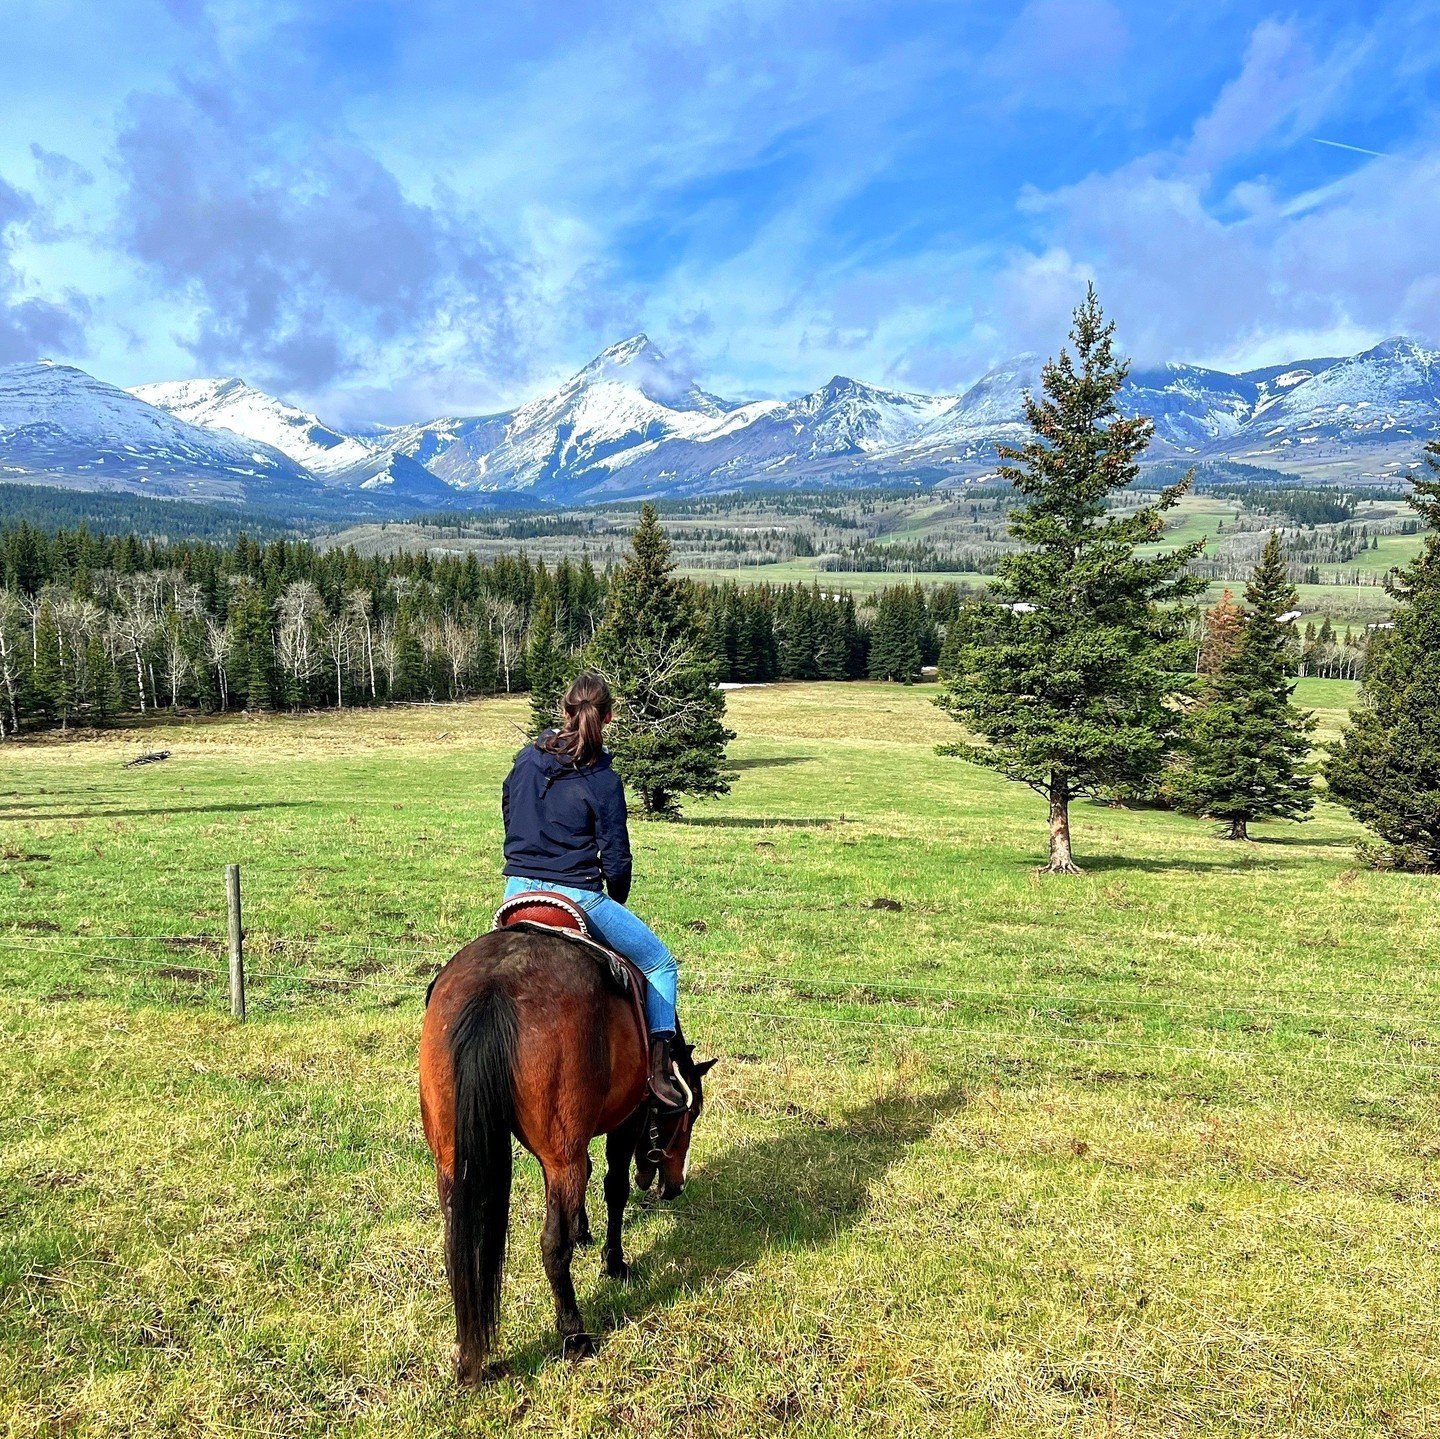 Early spring rides with a view like this are simply breathtaking! ⁠
⁠
#SpringScenes #RockiesViews #HorsebackAdventures #RockyMountainMagic #ScenicRides #SpringSplendor #HorsebackExploration #NatureWonders #MountainViews #EquestrianLife #OutdoorEscape